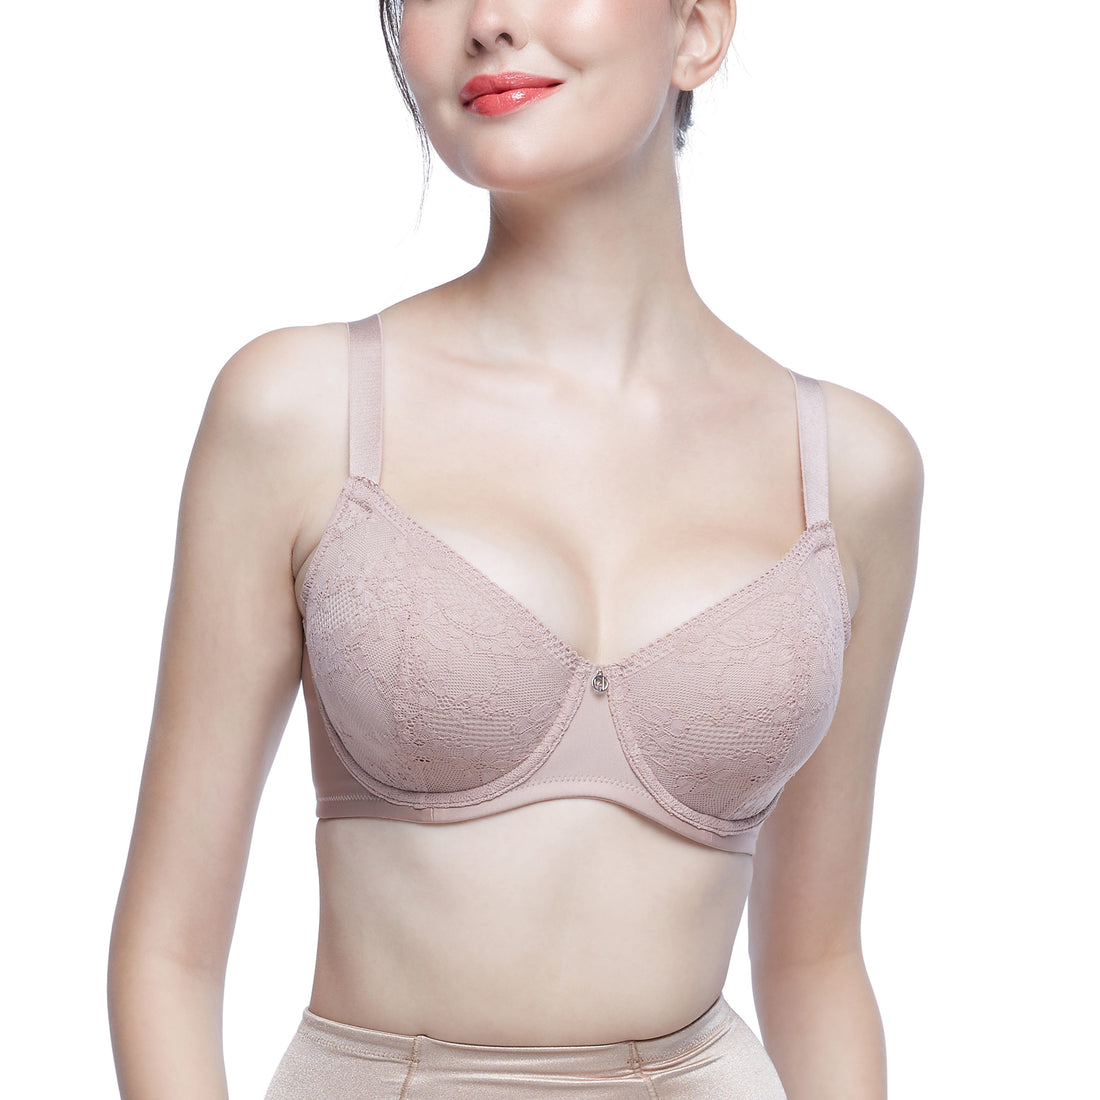 Wacoal Curve Diva Firming bra for large cup girls, model WB7396, beige (BE)